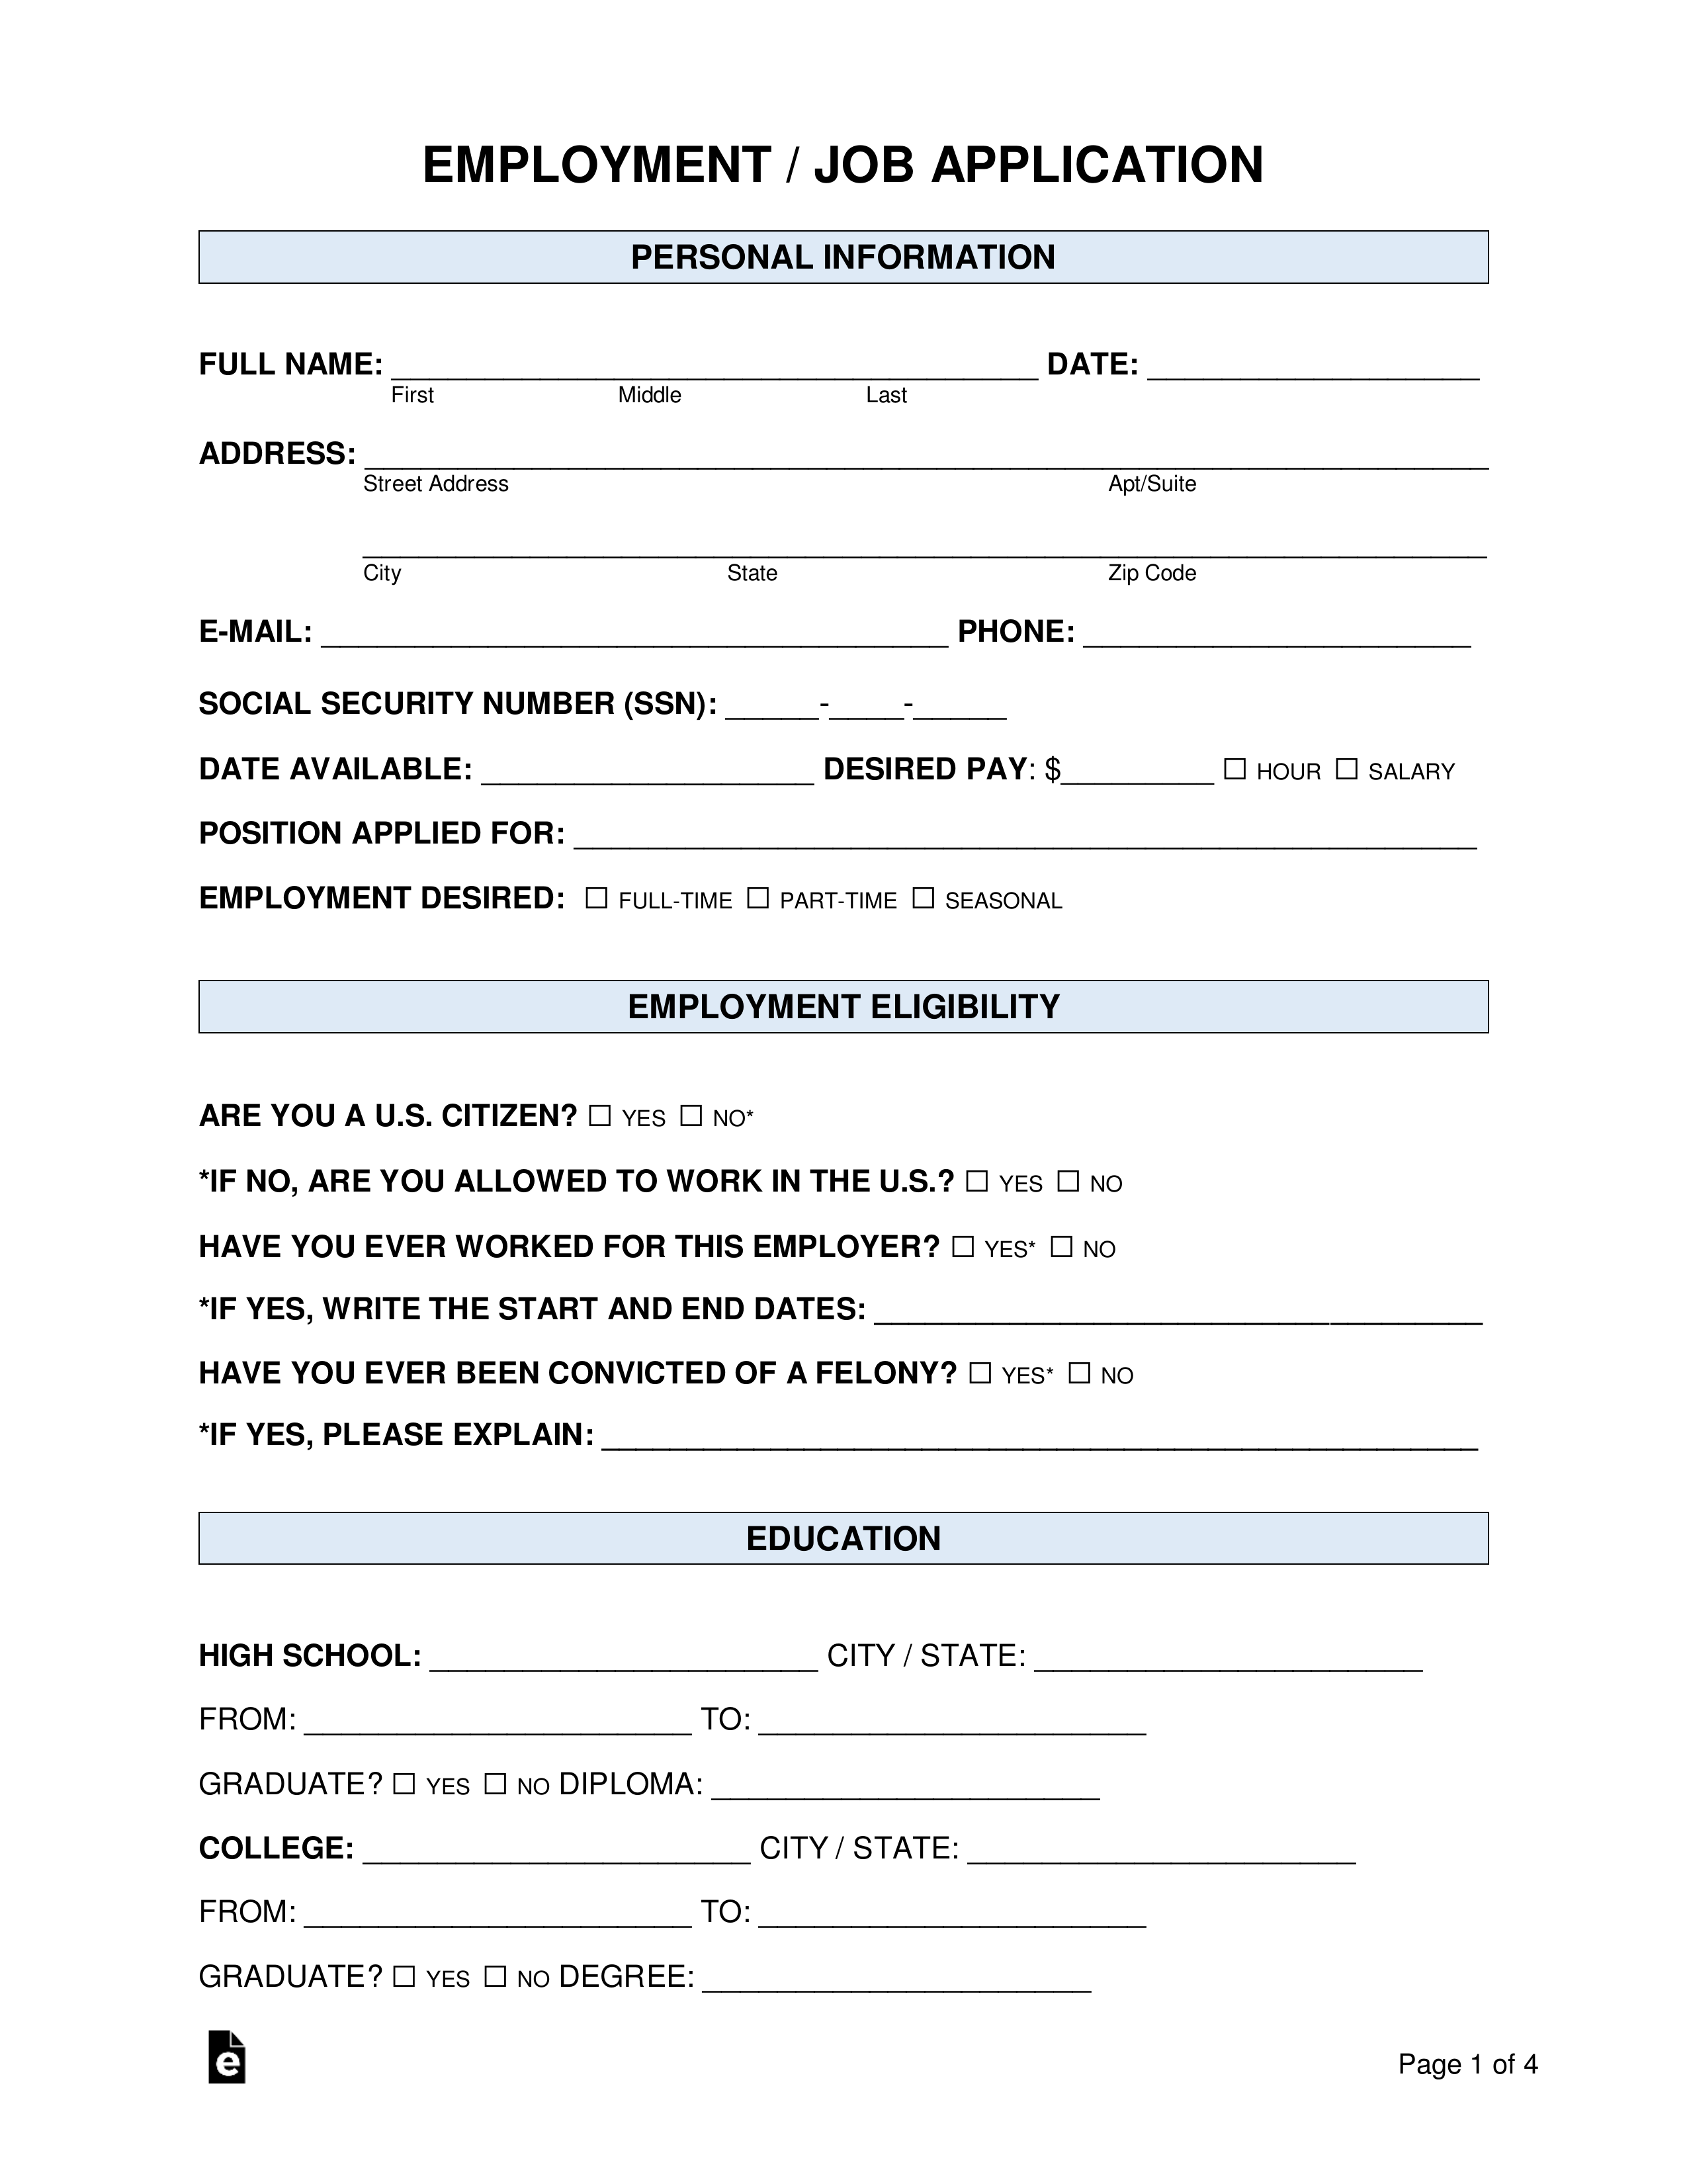 Free Job Application Form standard Template PDF Word EForms - Free Online Printable Applications